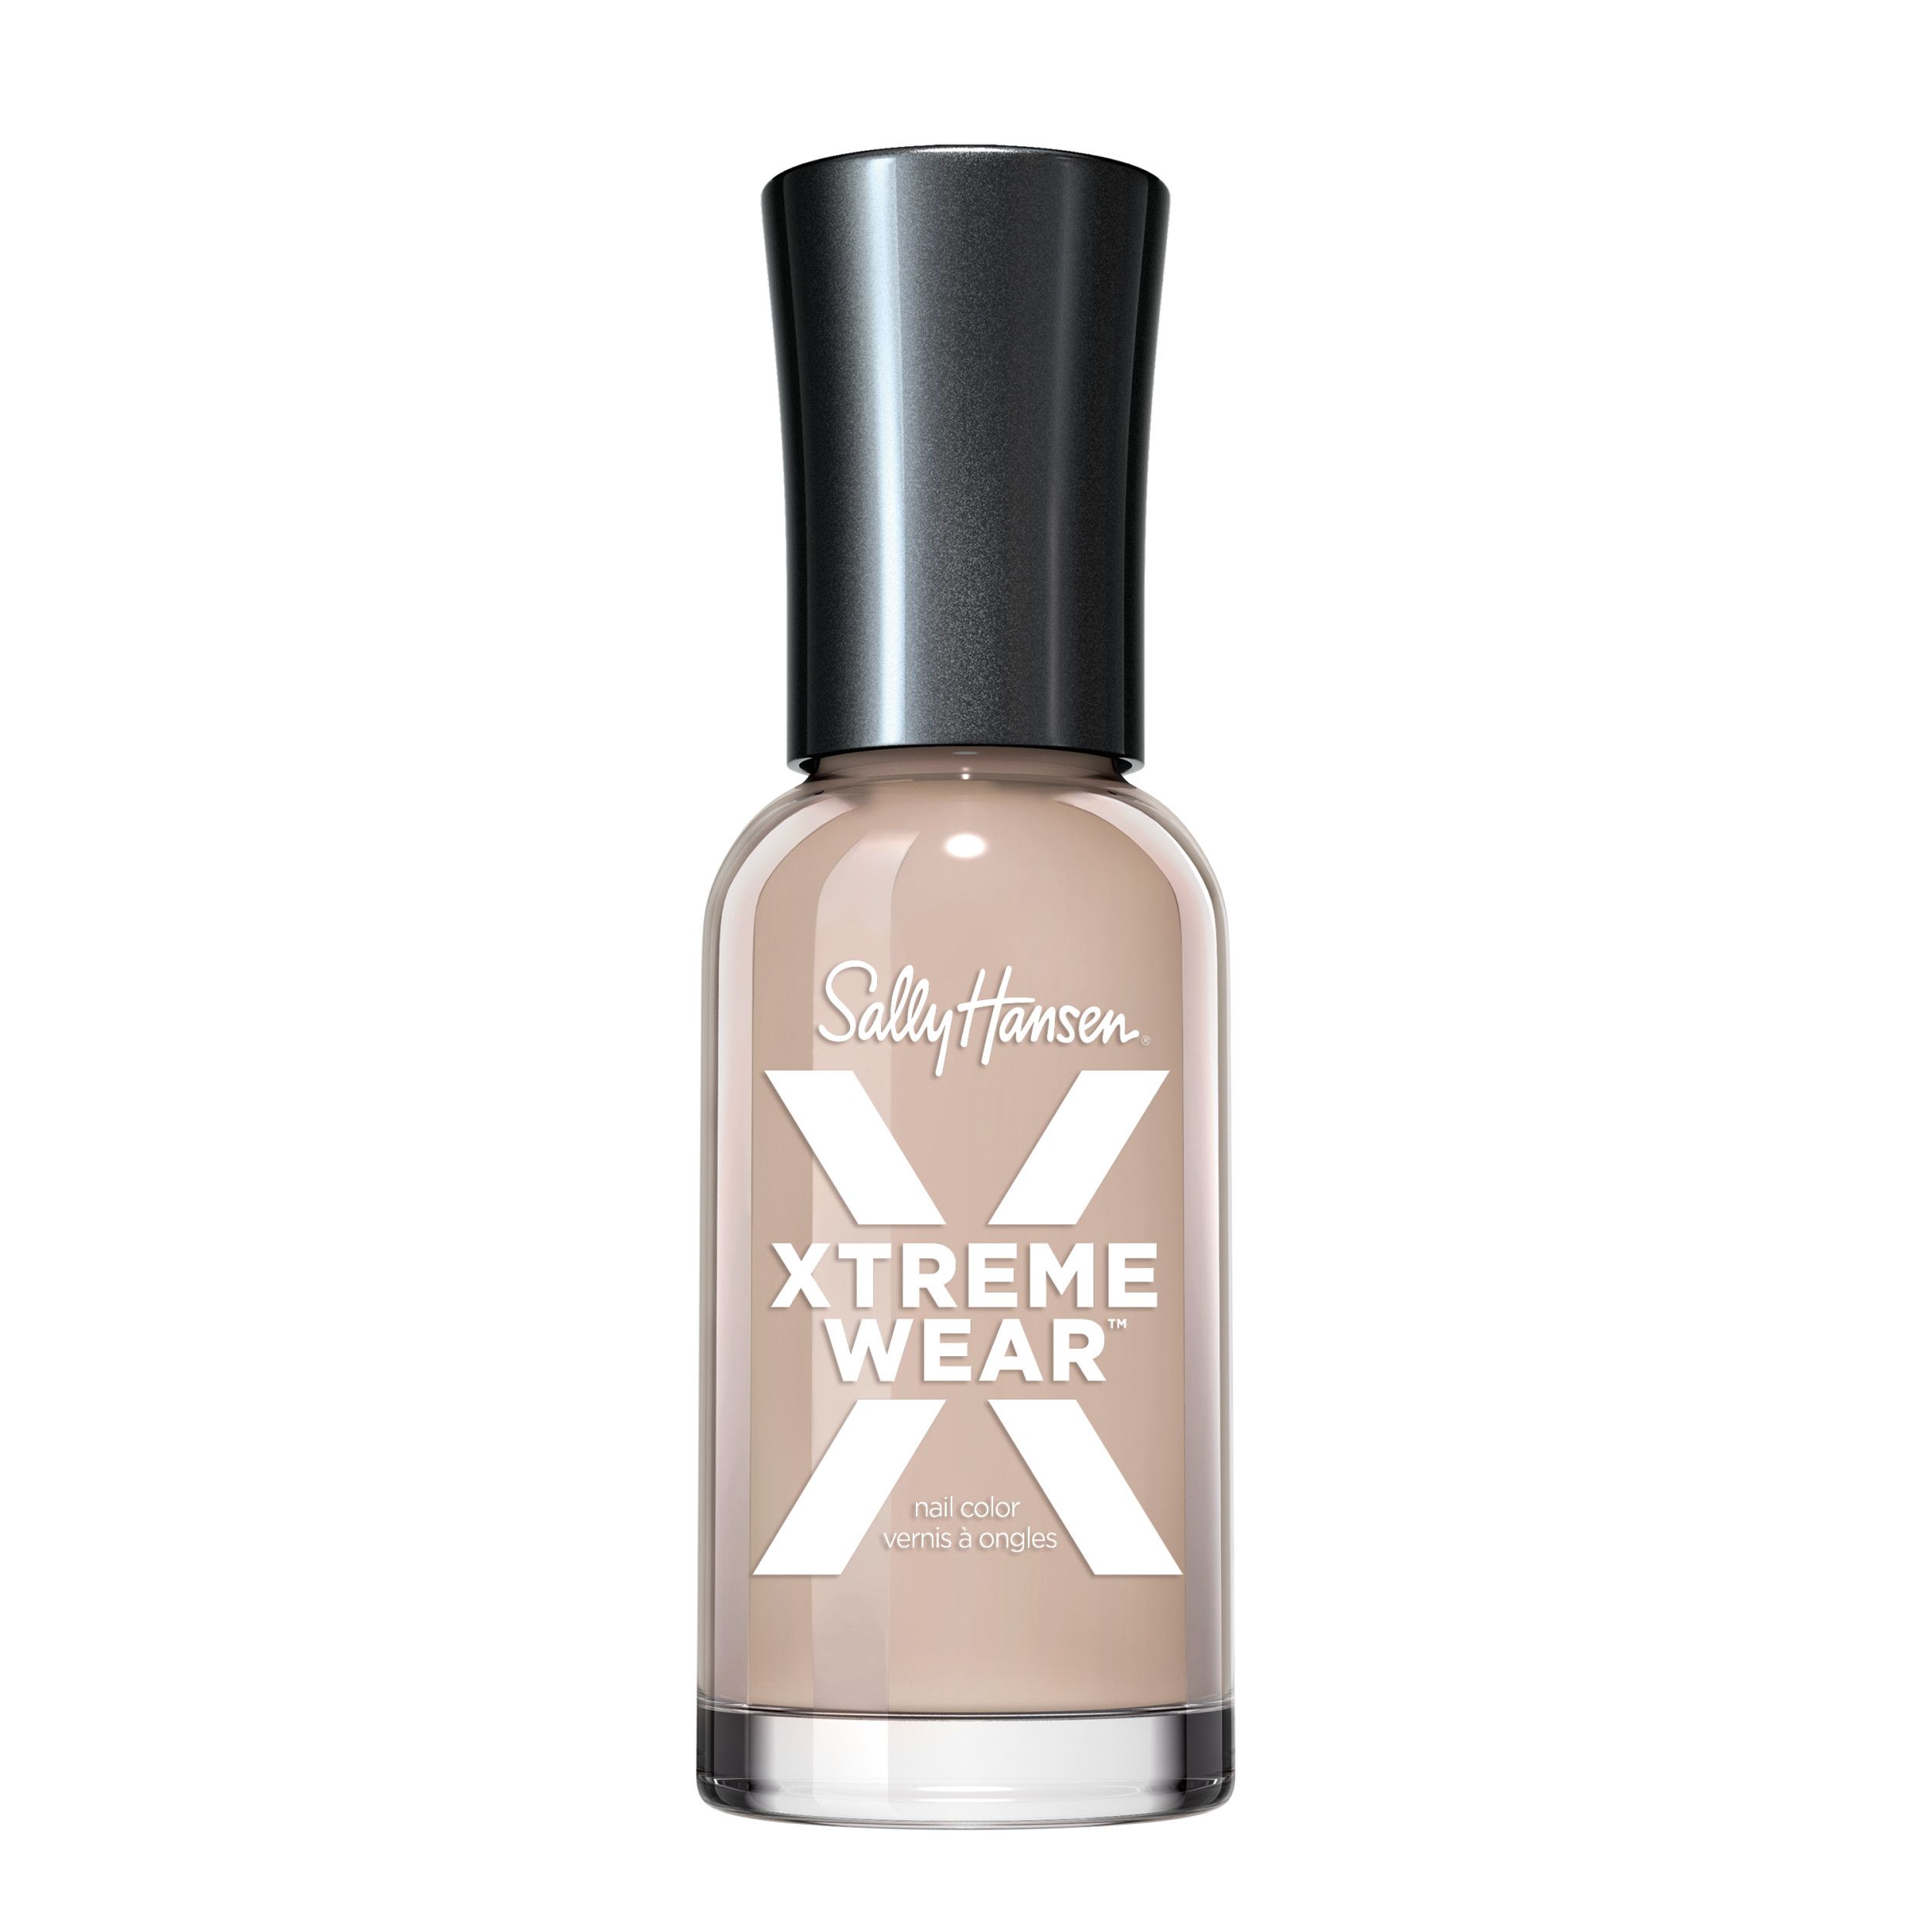 Sally Hansen Xtreme Wear Nail Polish, Nifty Nude, 0.4 fl oz, Chip Resistant, Bold Color - image 1 of 14